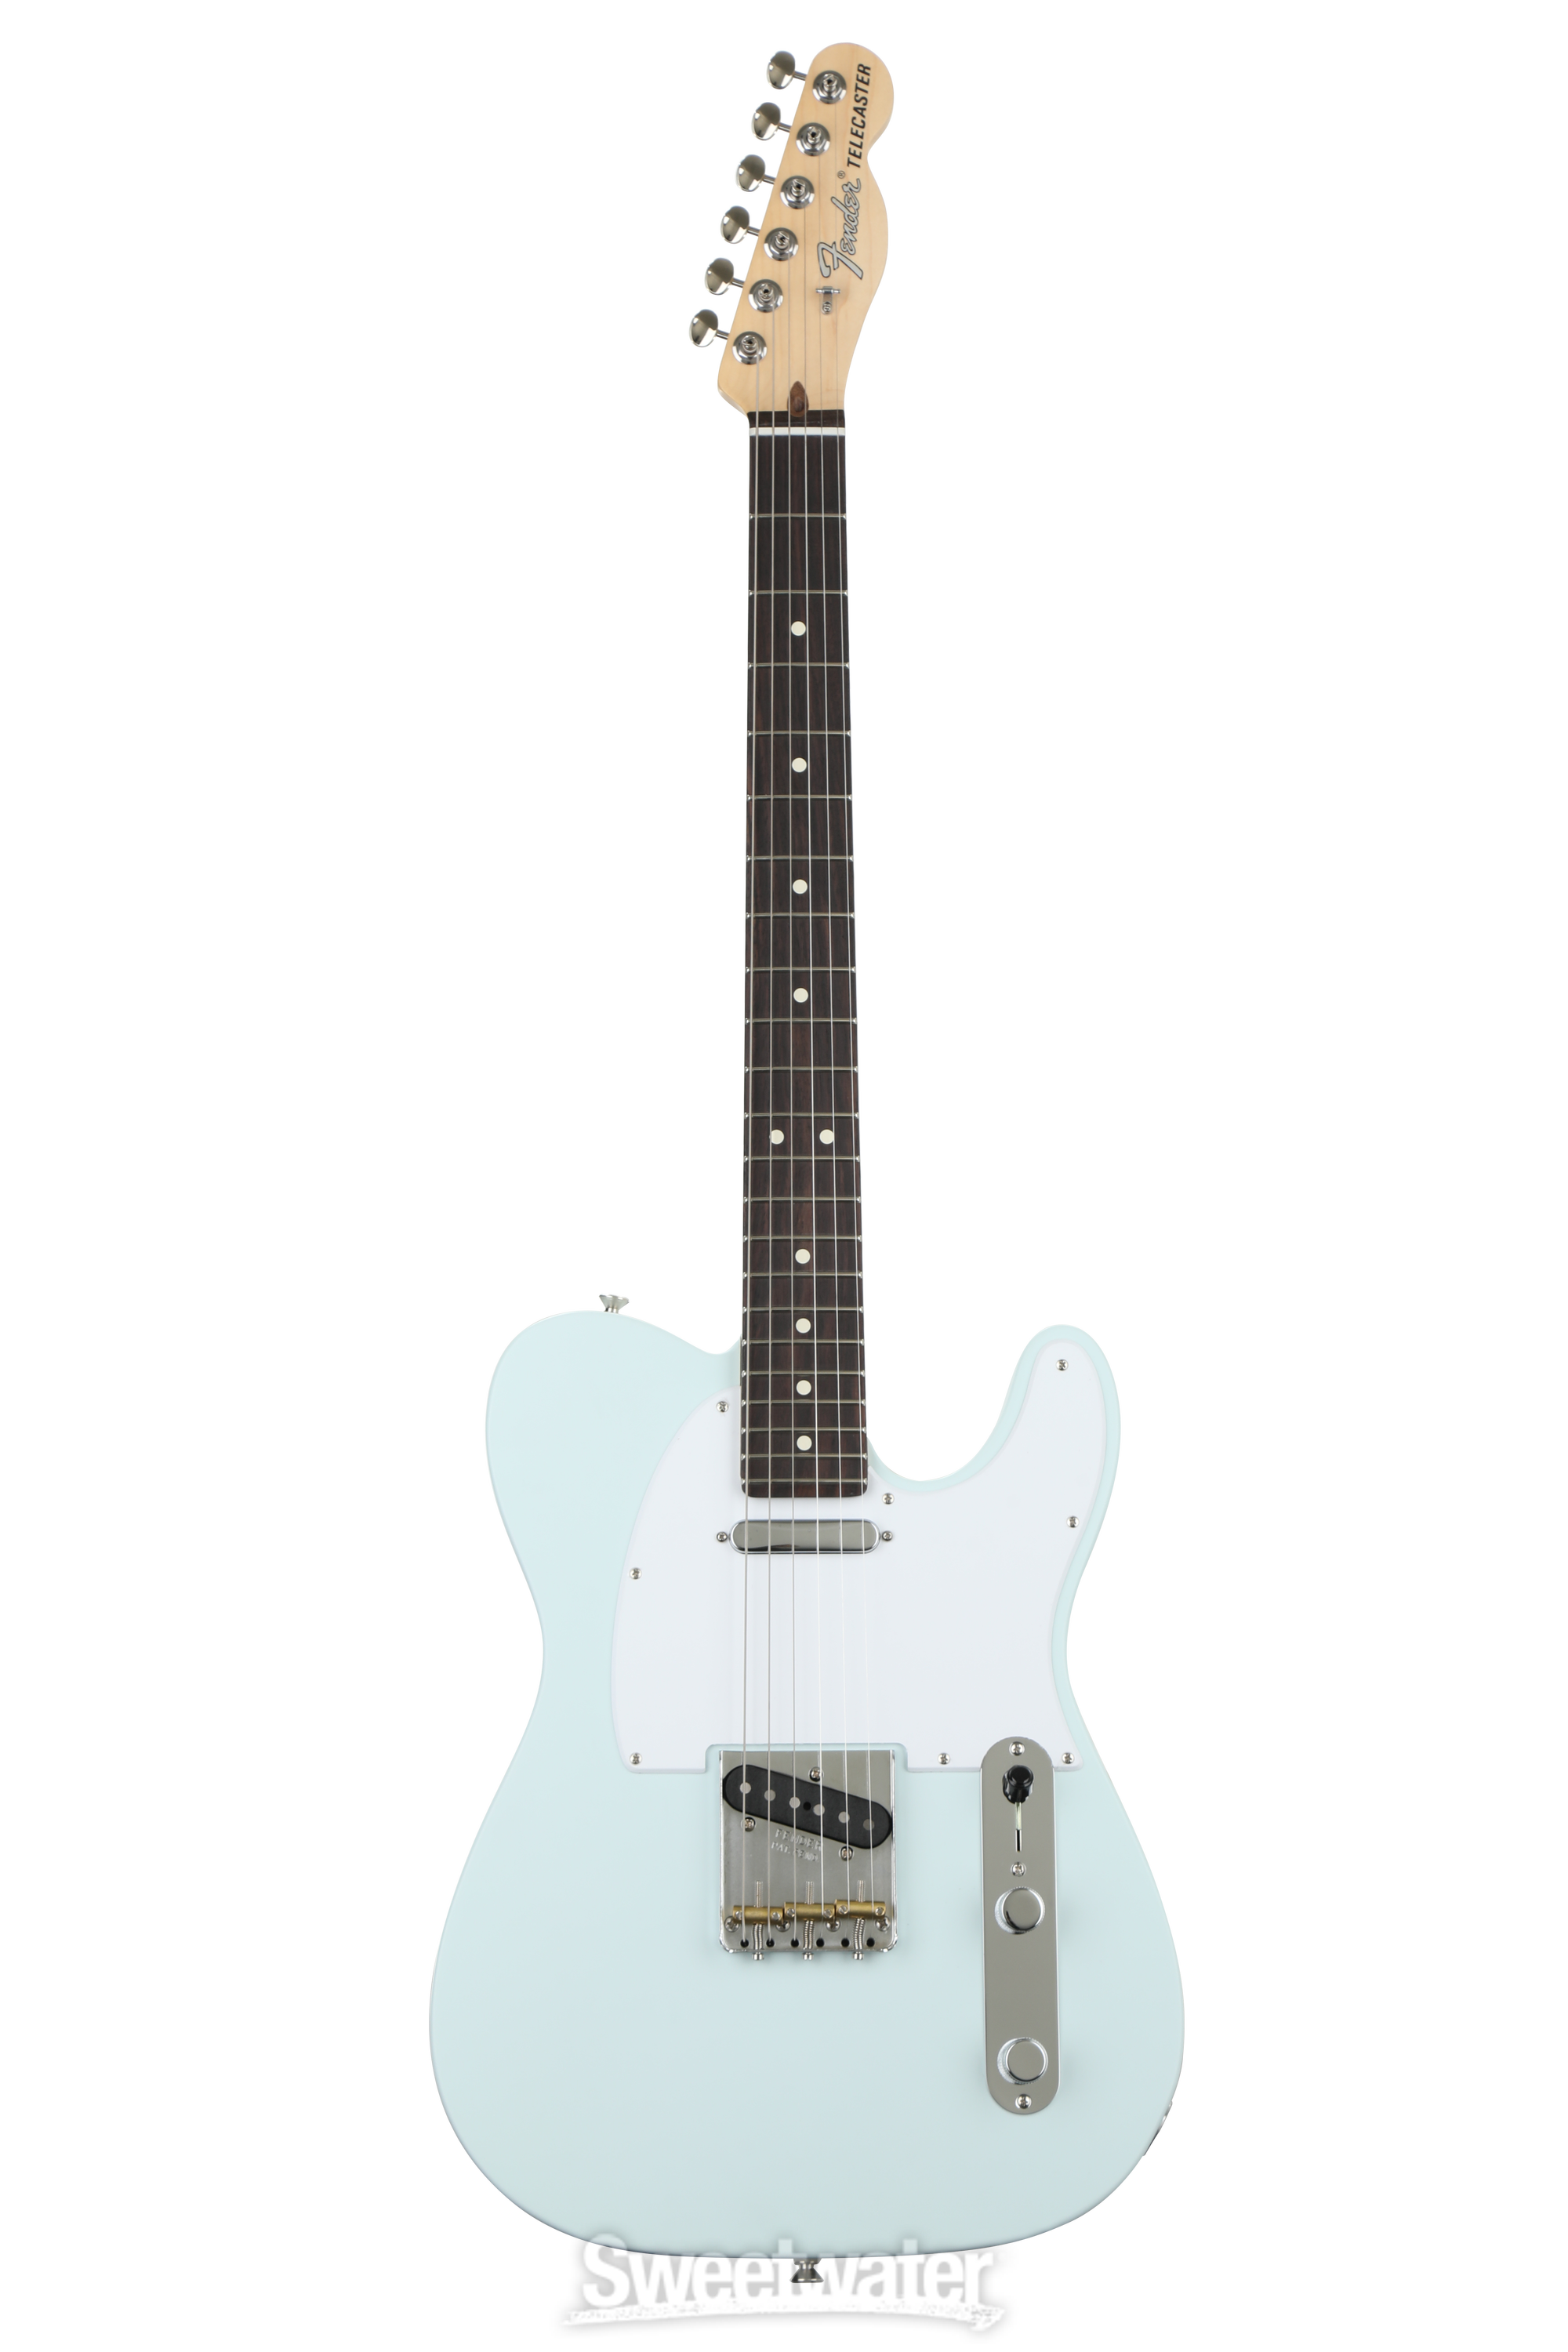 Fender American Performer Telecaster - Satin Sonic Blue with 